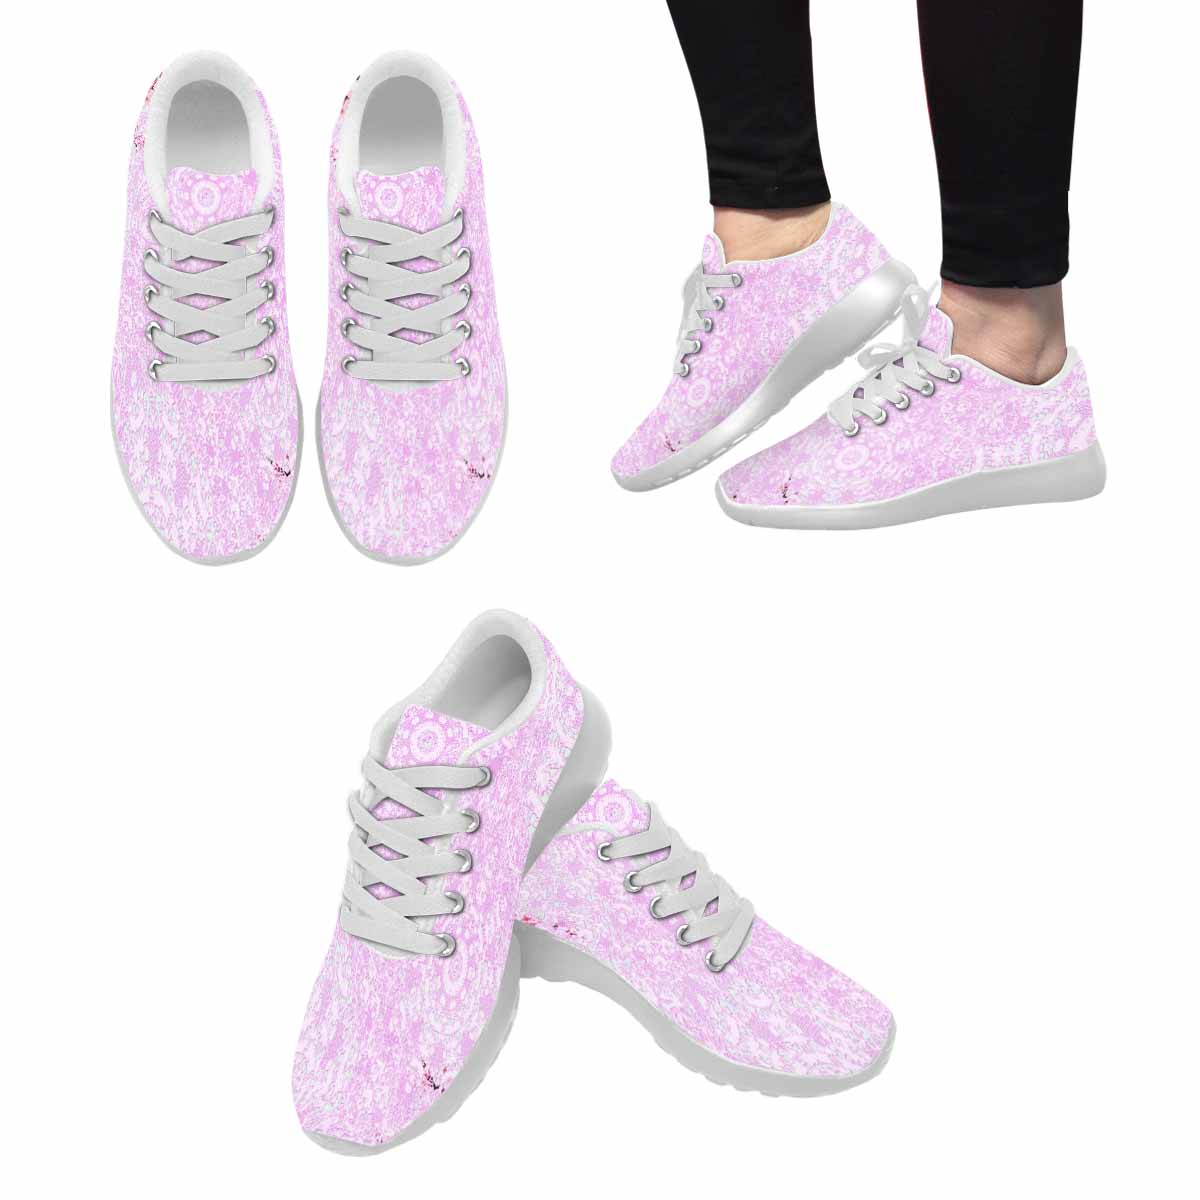 Victorian lace print, womens cute casual or running sneakers, design 09